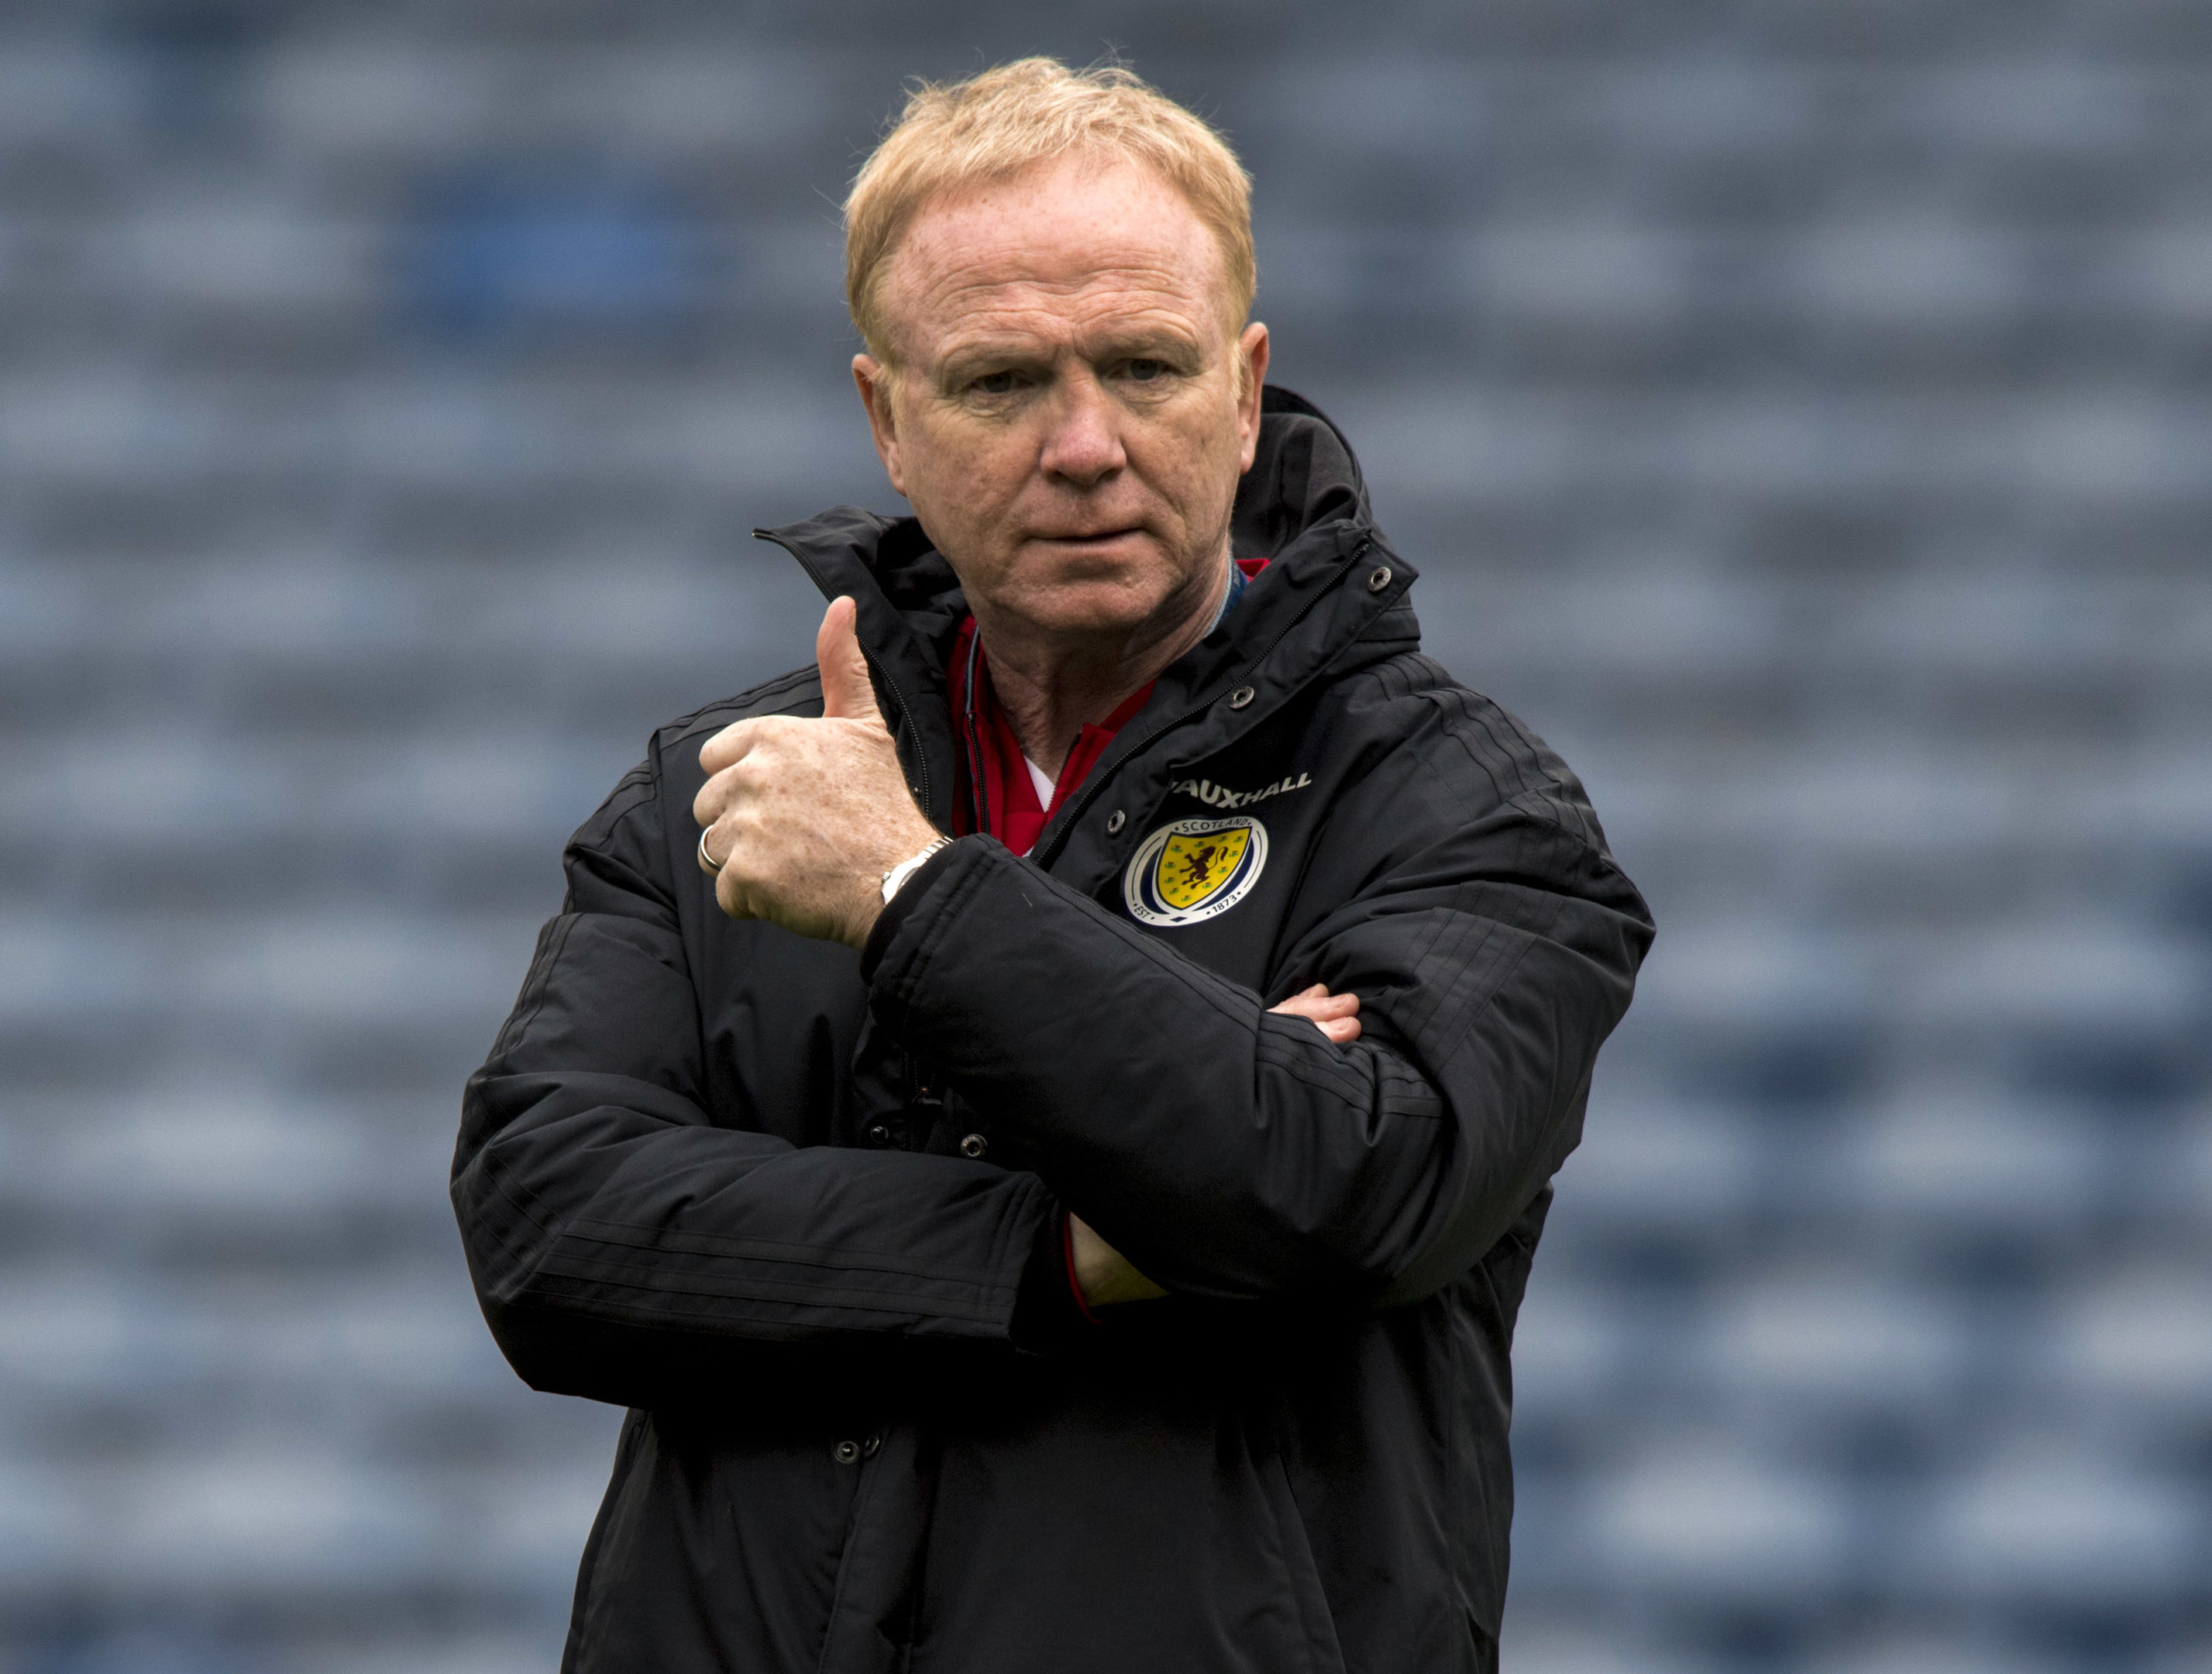 After Friday’s 1-0 Hampden defeat to Costa Rica, Scotland manager Alex McLeish is ready to select more experienced players against Hungary tonight